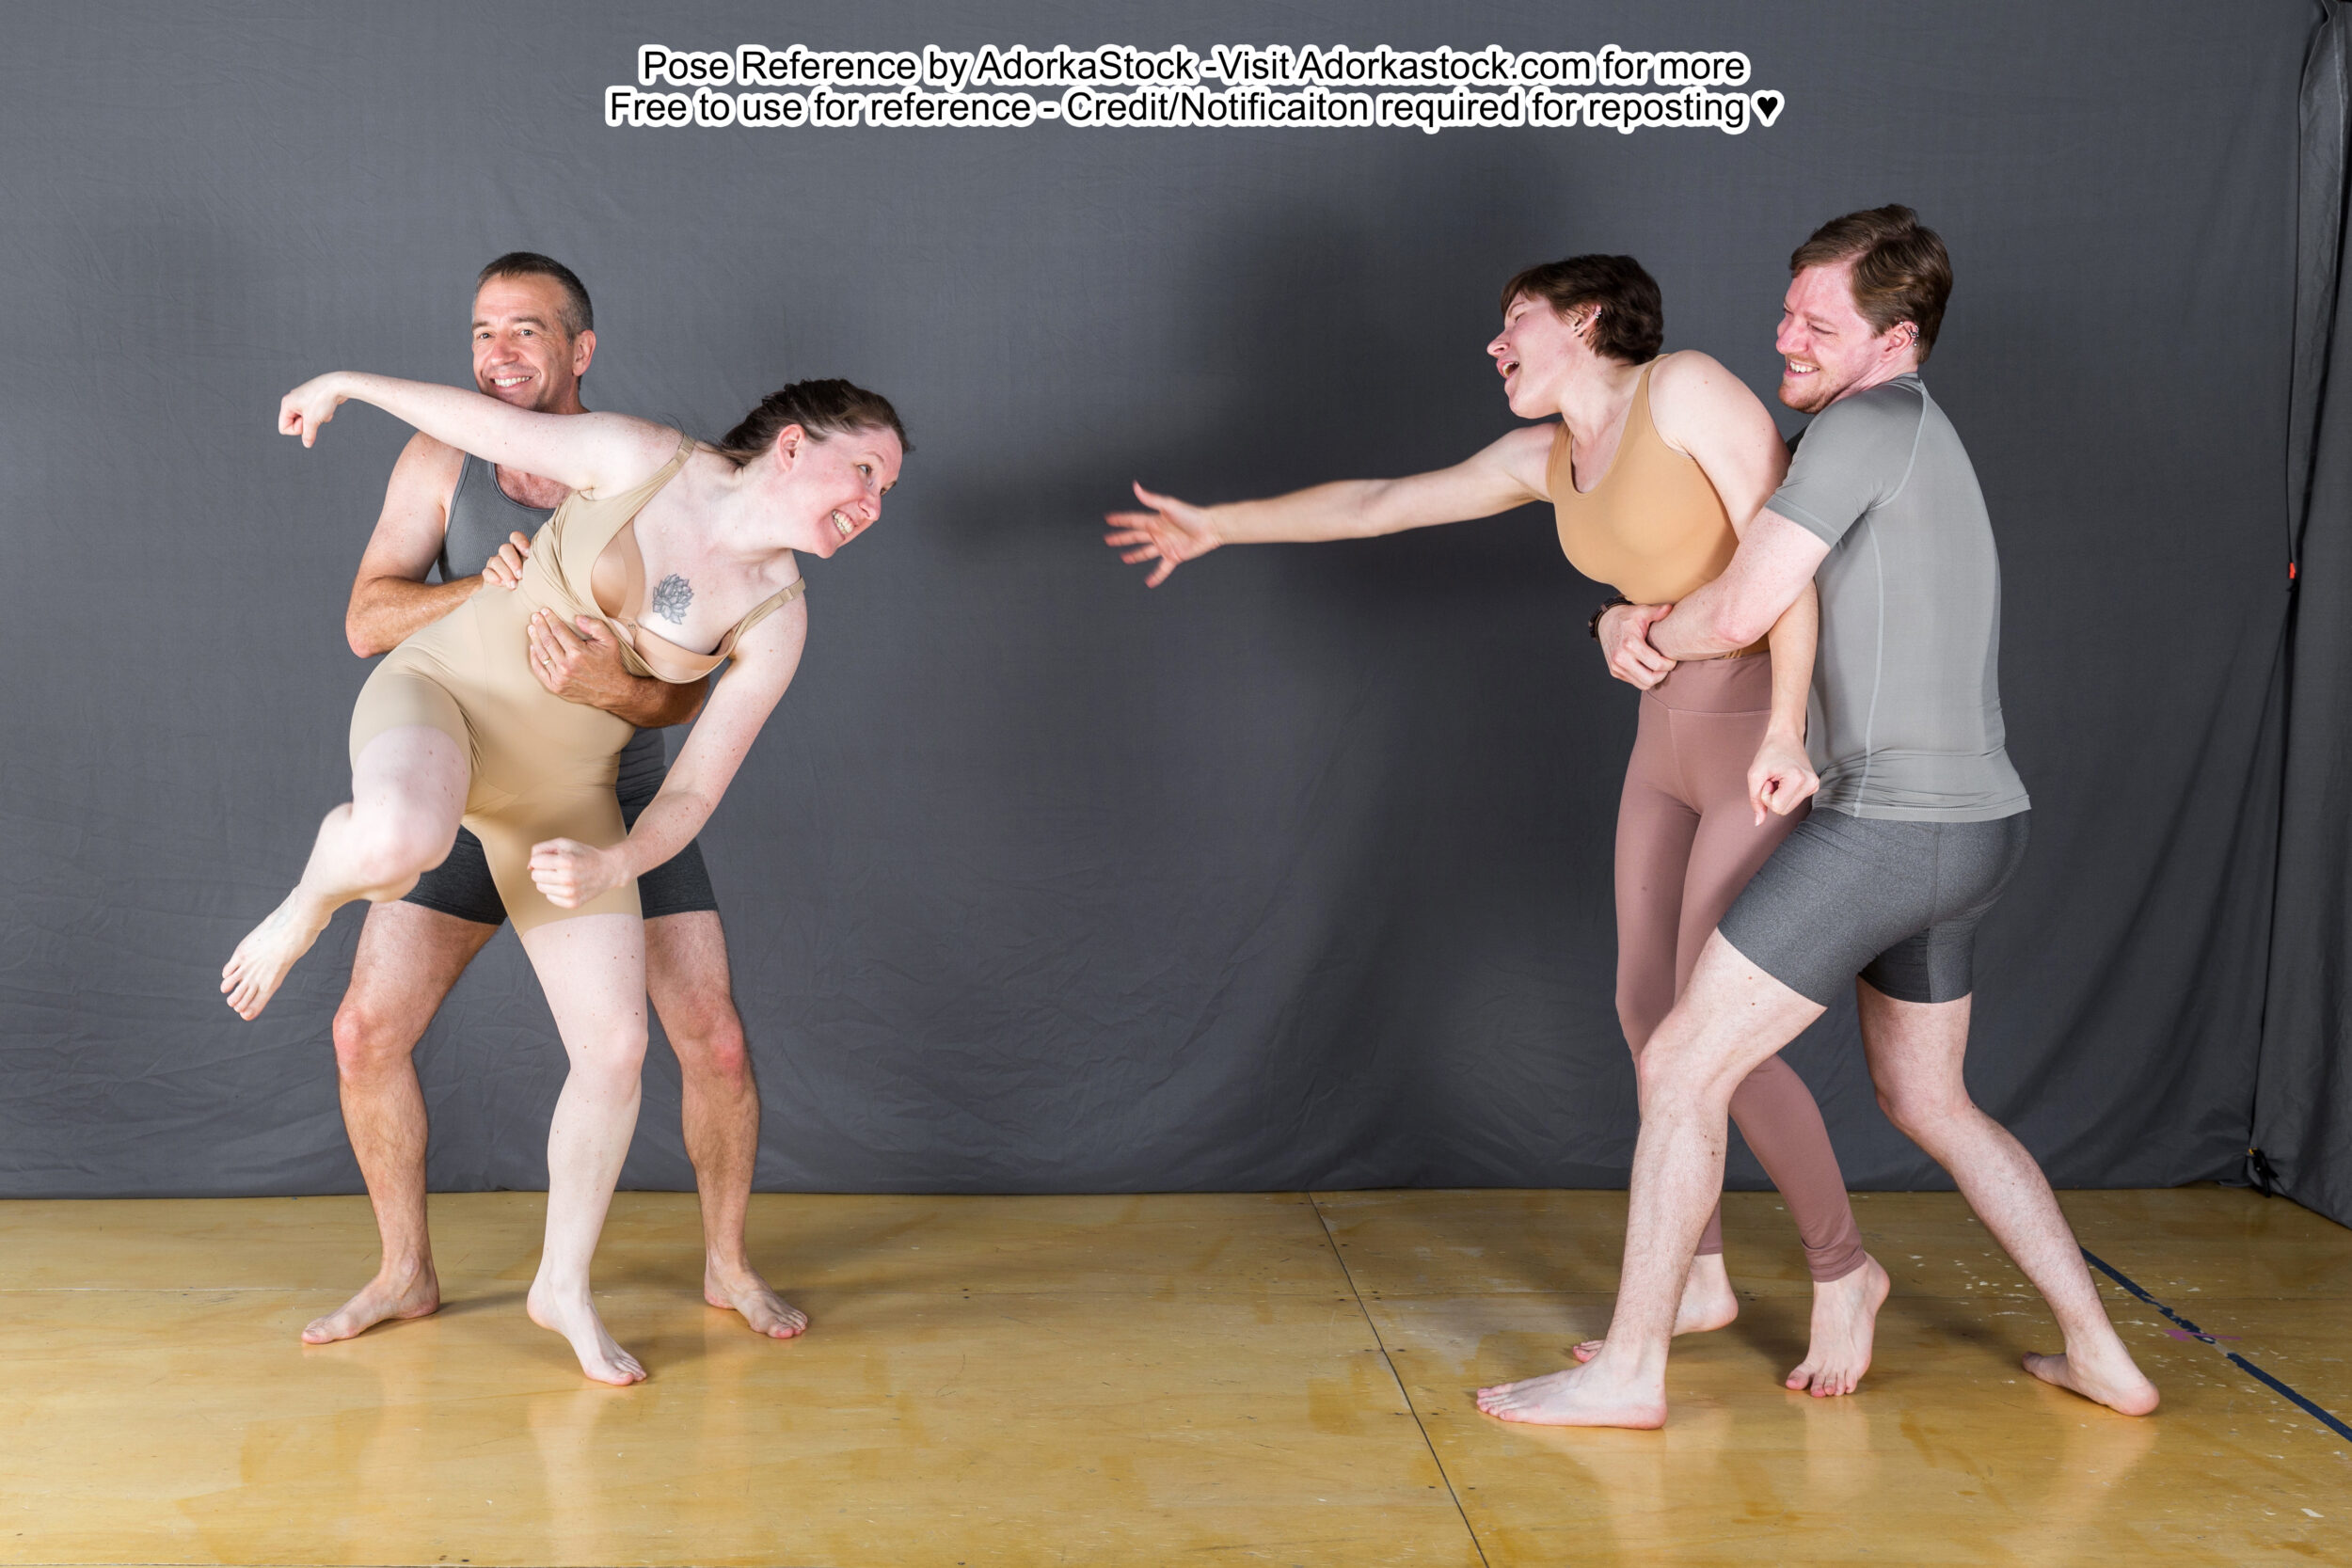 Group pose reference where two models are holding two others from getting at each other.